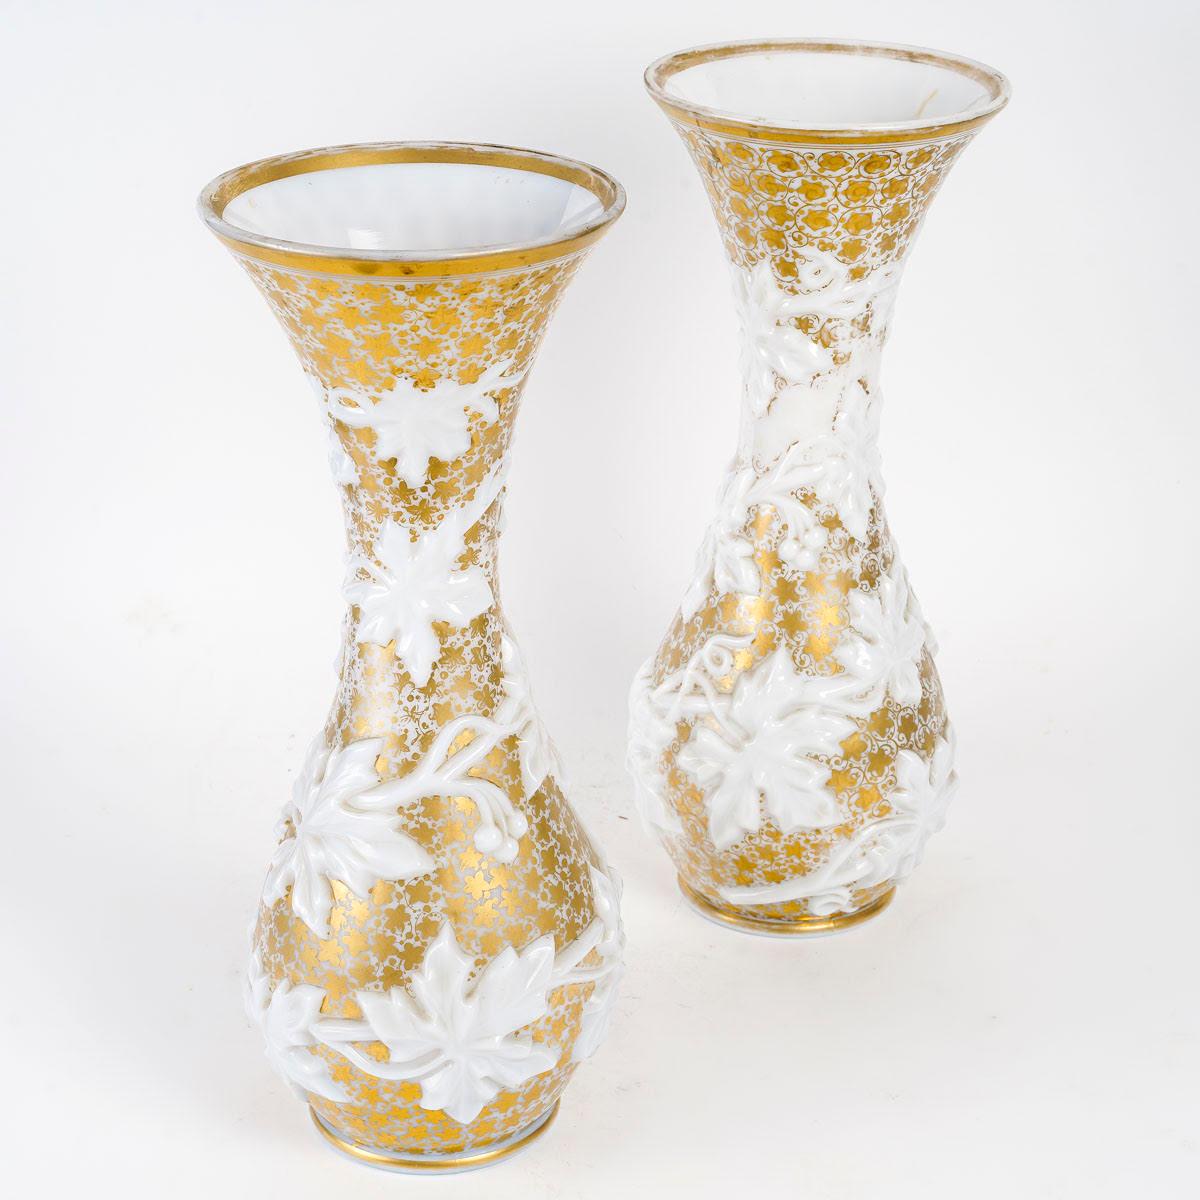 French Pair of Opaline Vases Enhanced with Gold, 19th Century, Napoleon III Period. For Sale